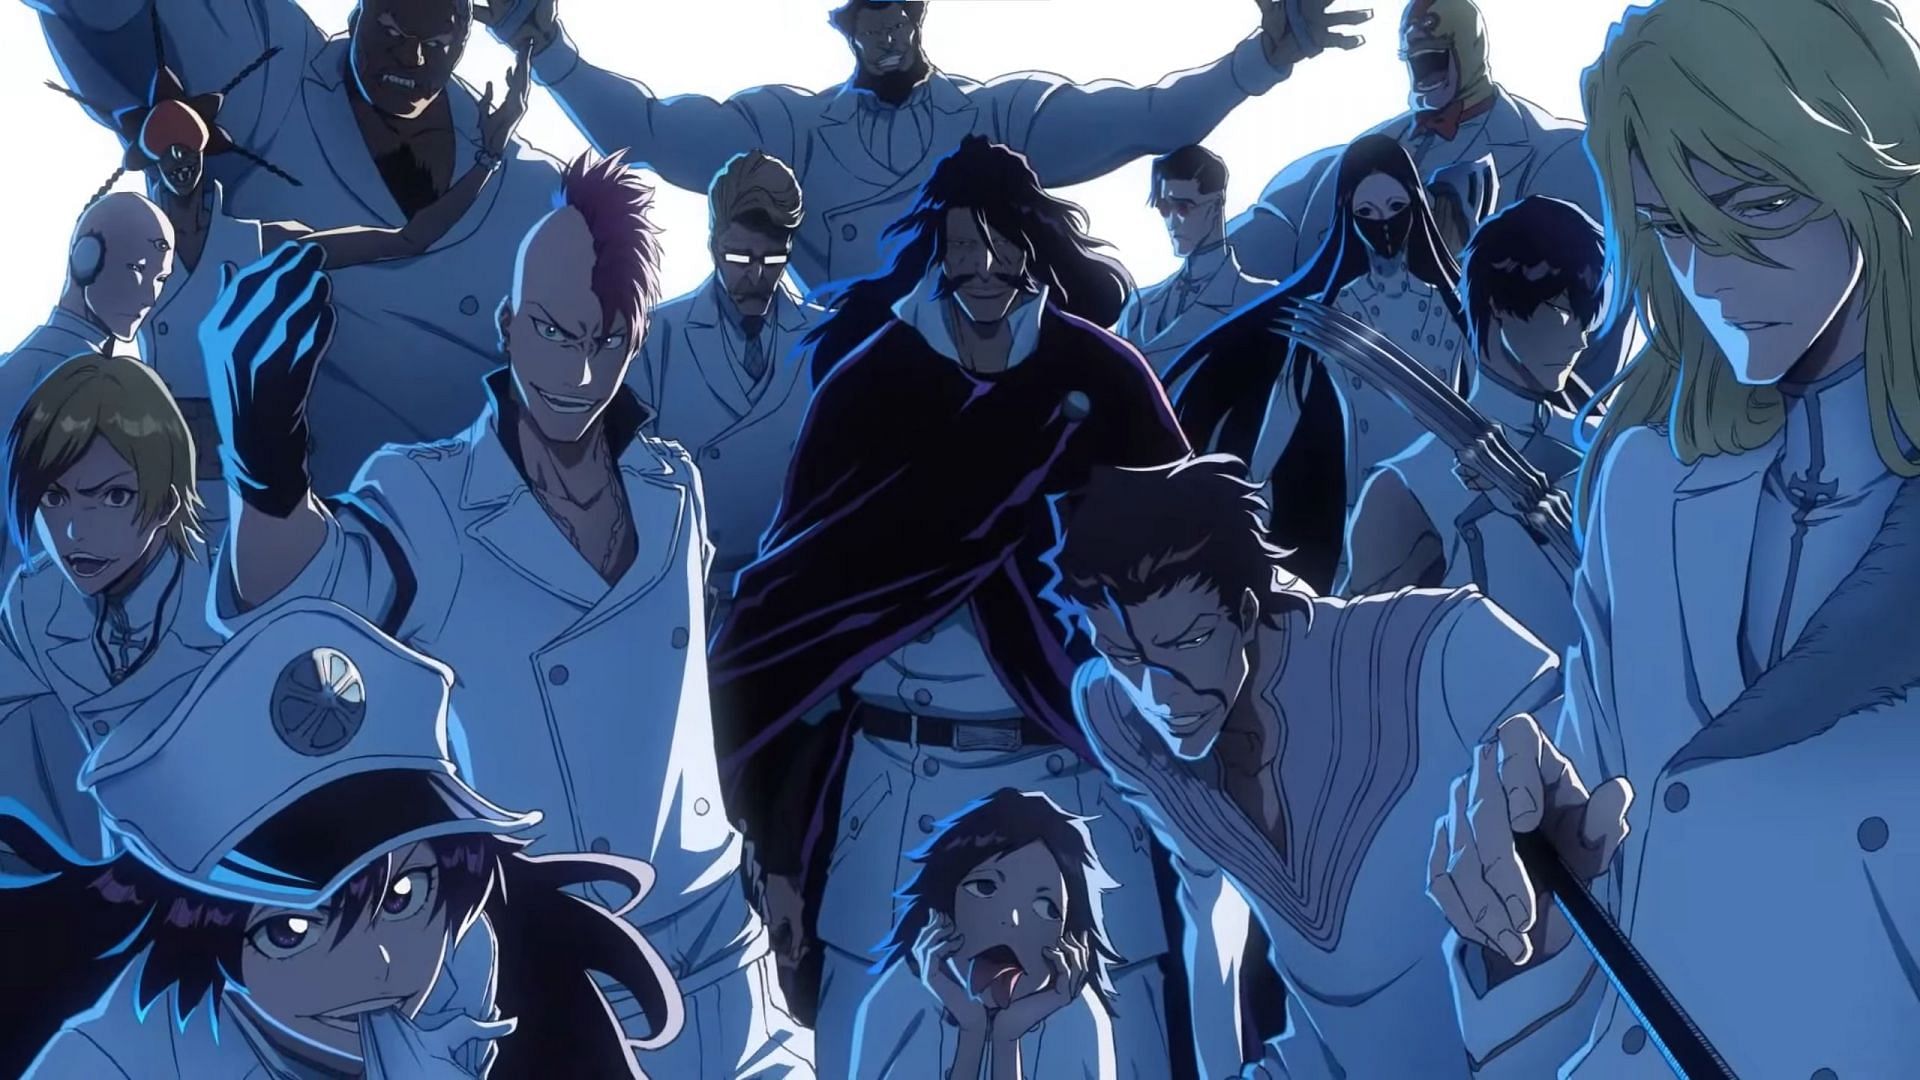 The opening theme for TYBW set fire to social media as fans welcomed back their favorite anime (Image via Studio Pierrot)